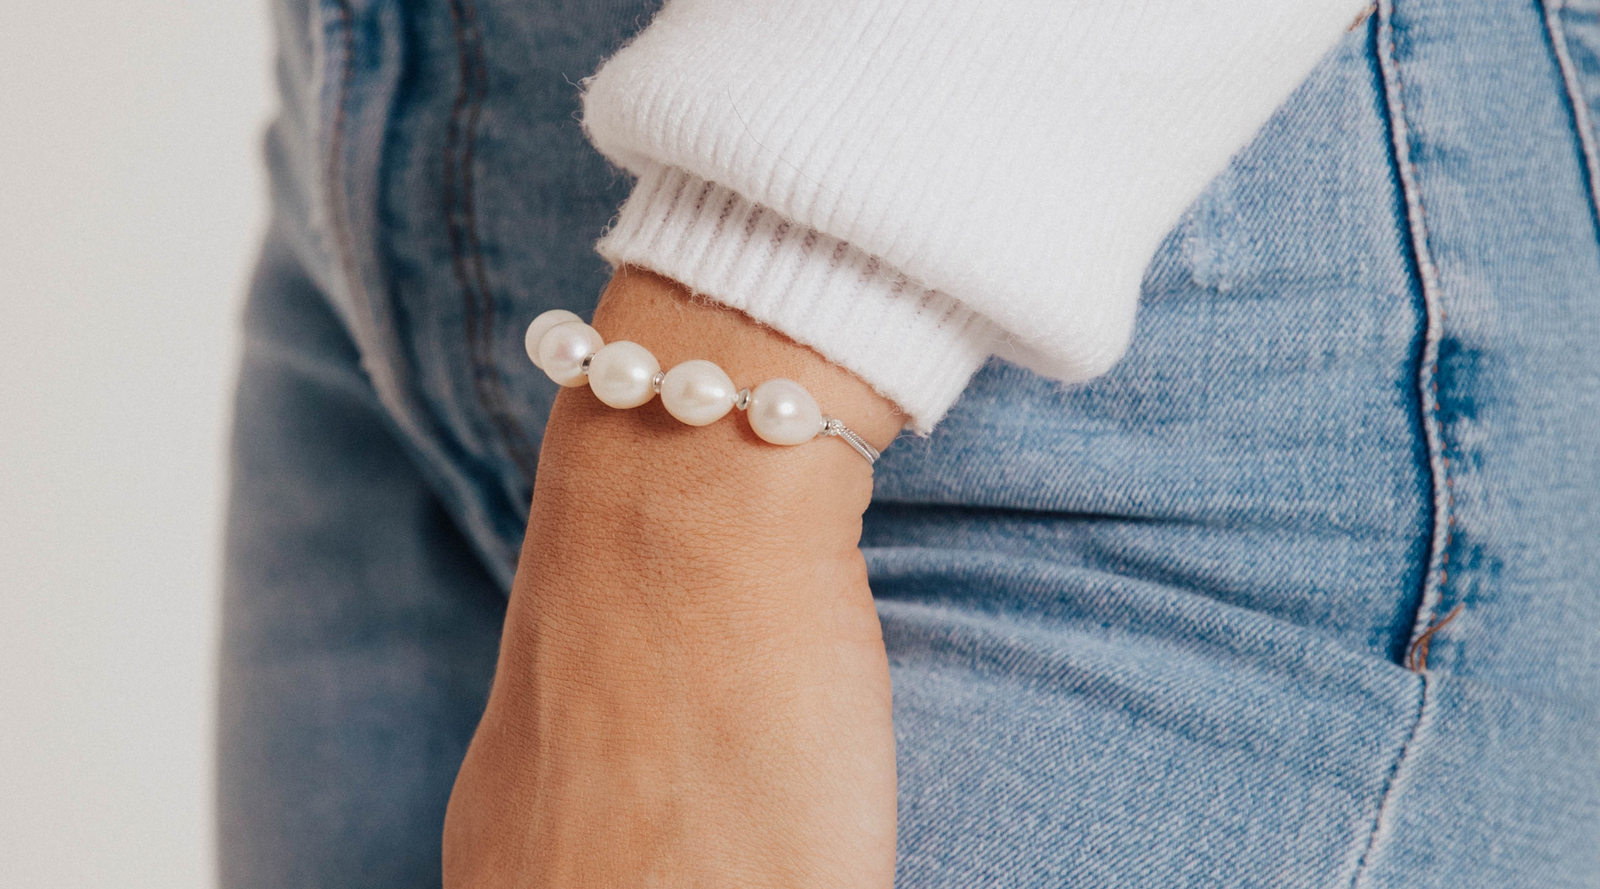 9 Fashion Tips for Wearing Bracelets on Both Wrists